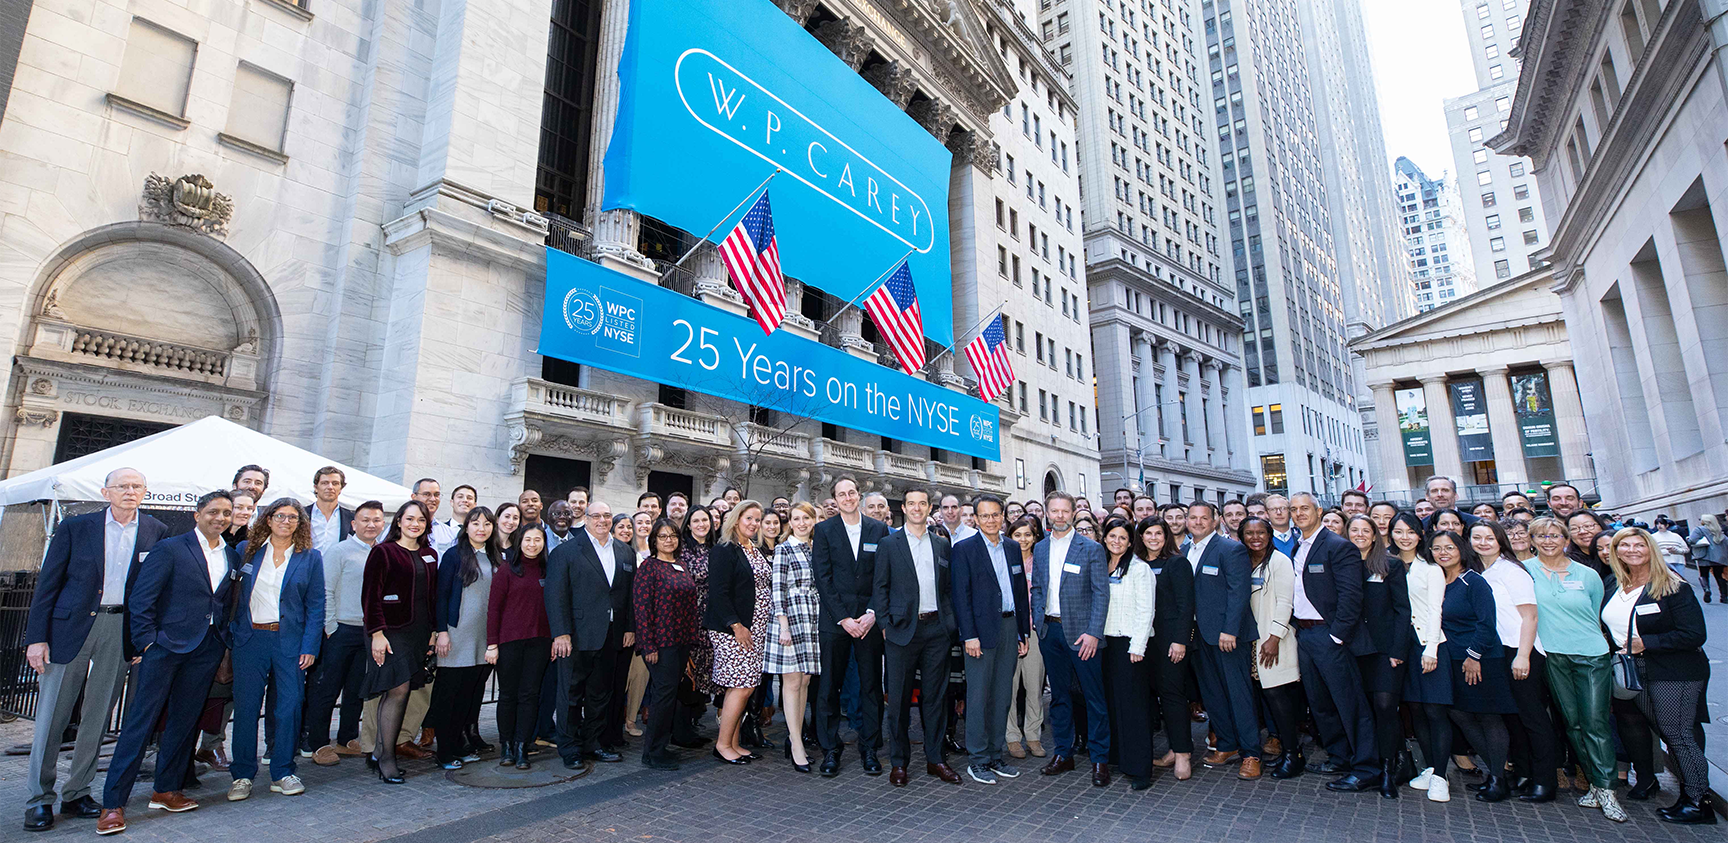 All of the New York employees gathering outside the New York Stock Exchange on the 50th anniversary of the company's founding.